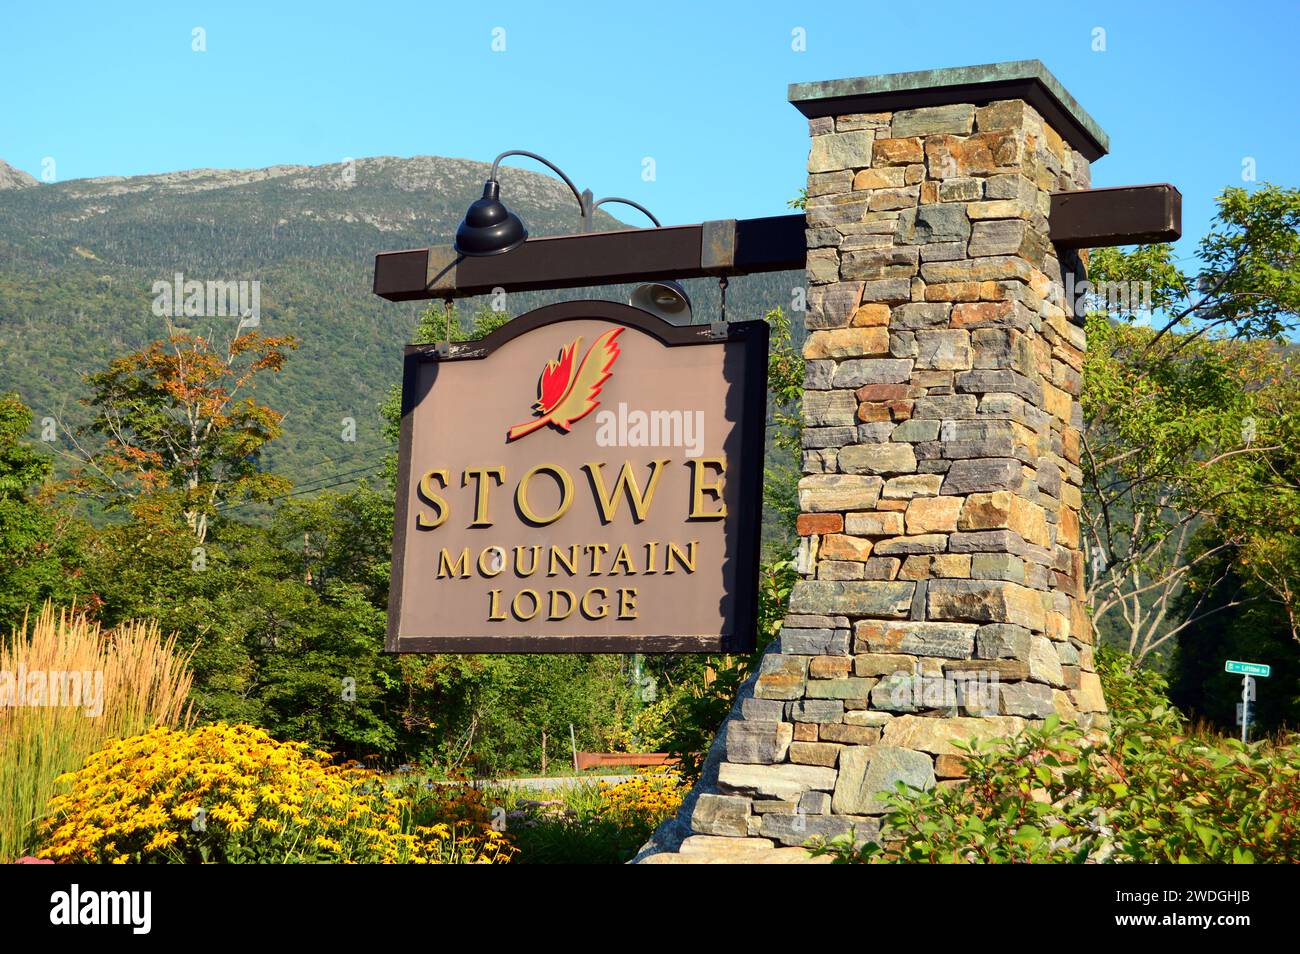 A stone column and sign welcomes visitors to the famous Stowe Mountain Lodge, in Vermont Stock Photo